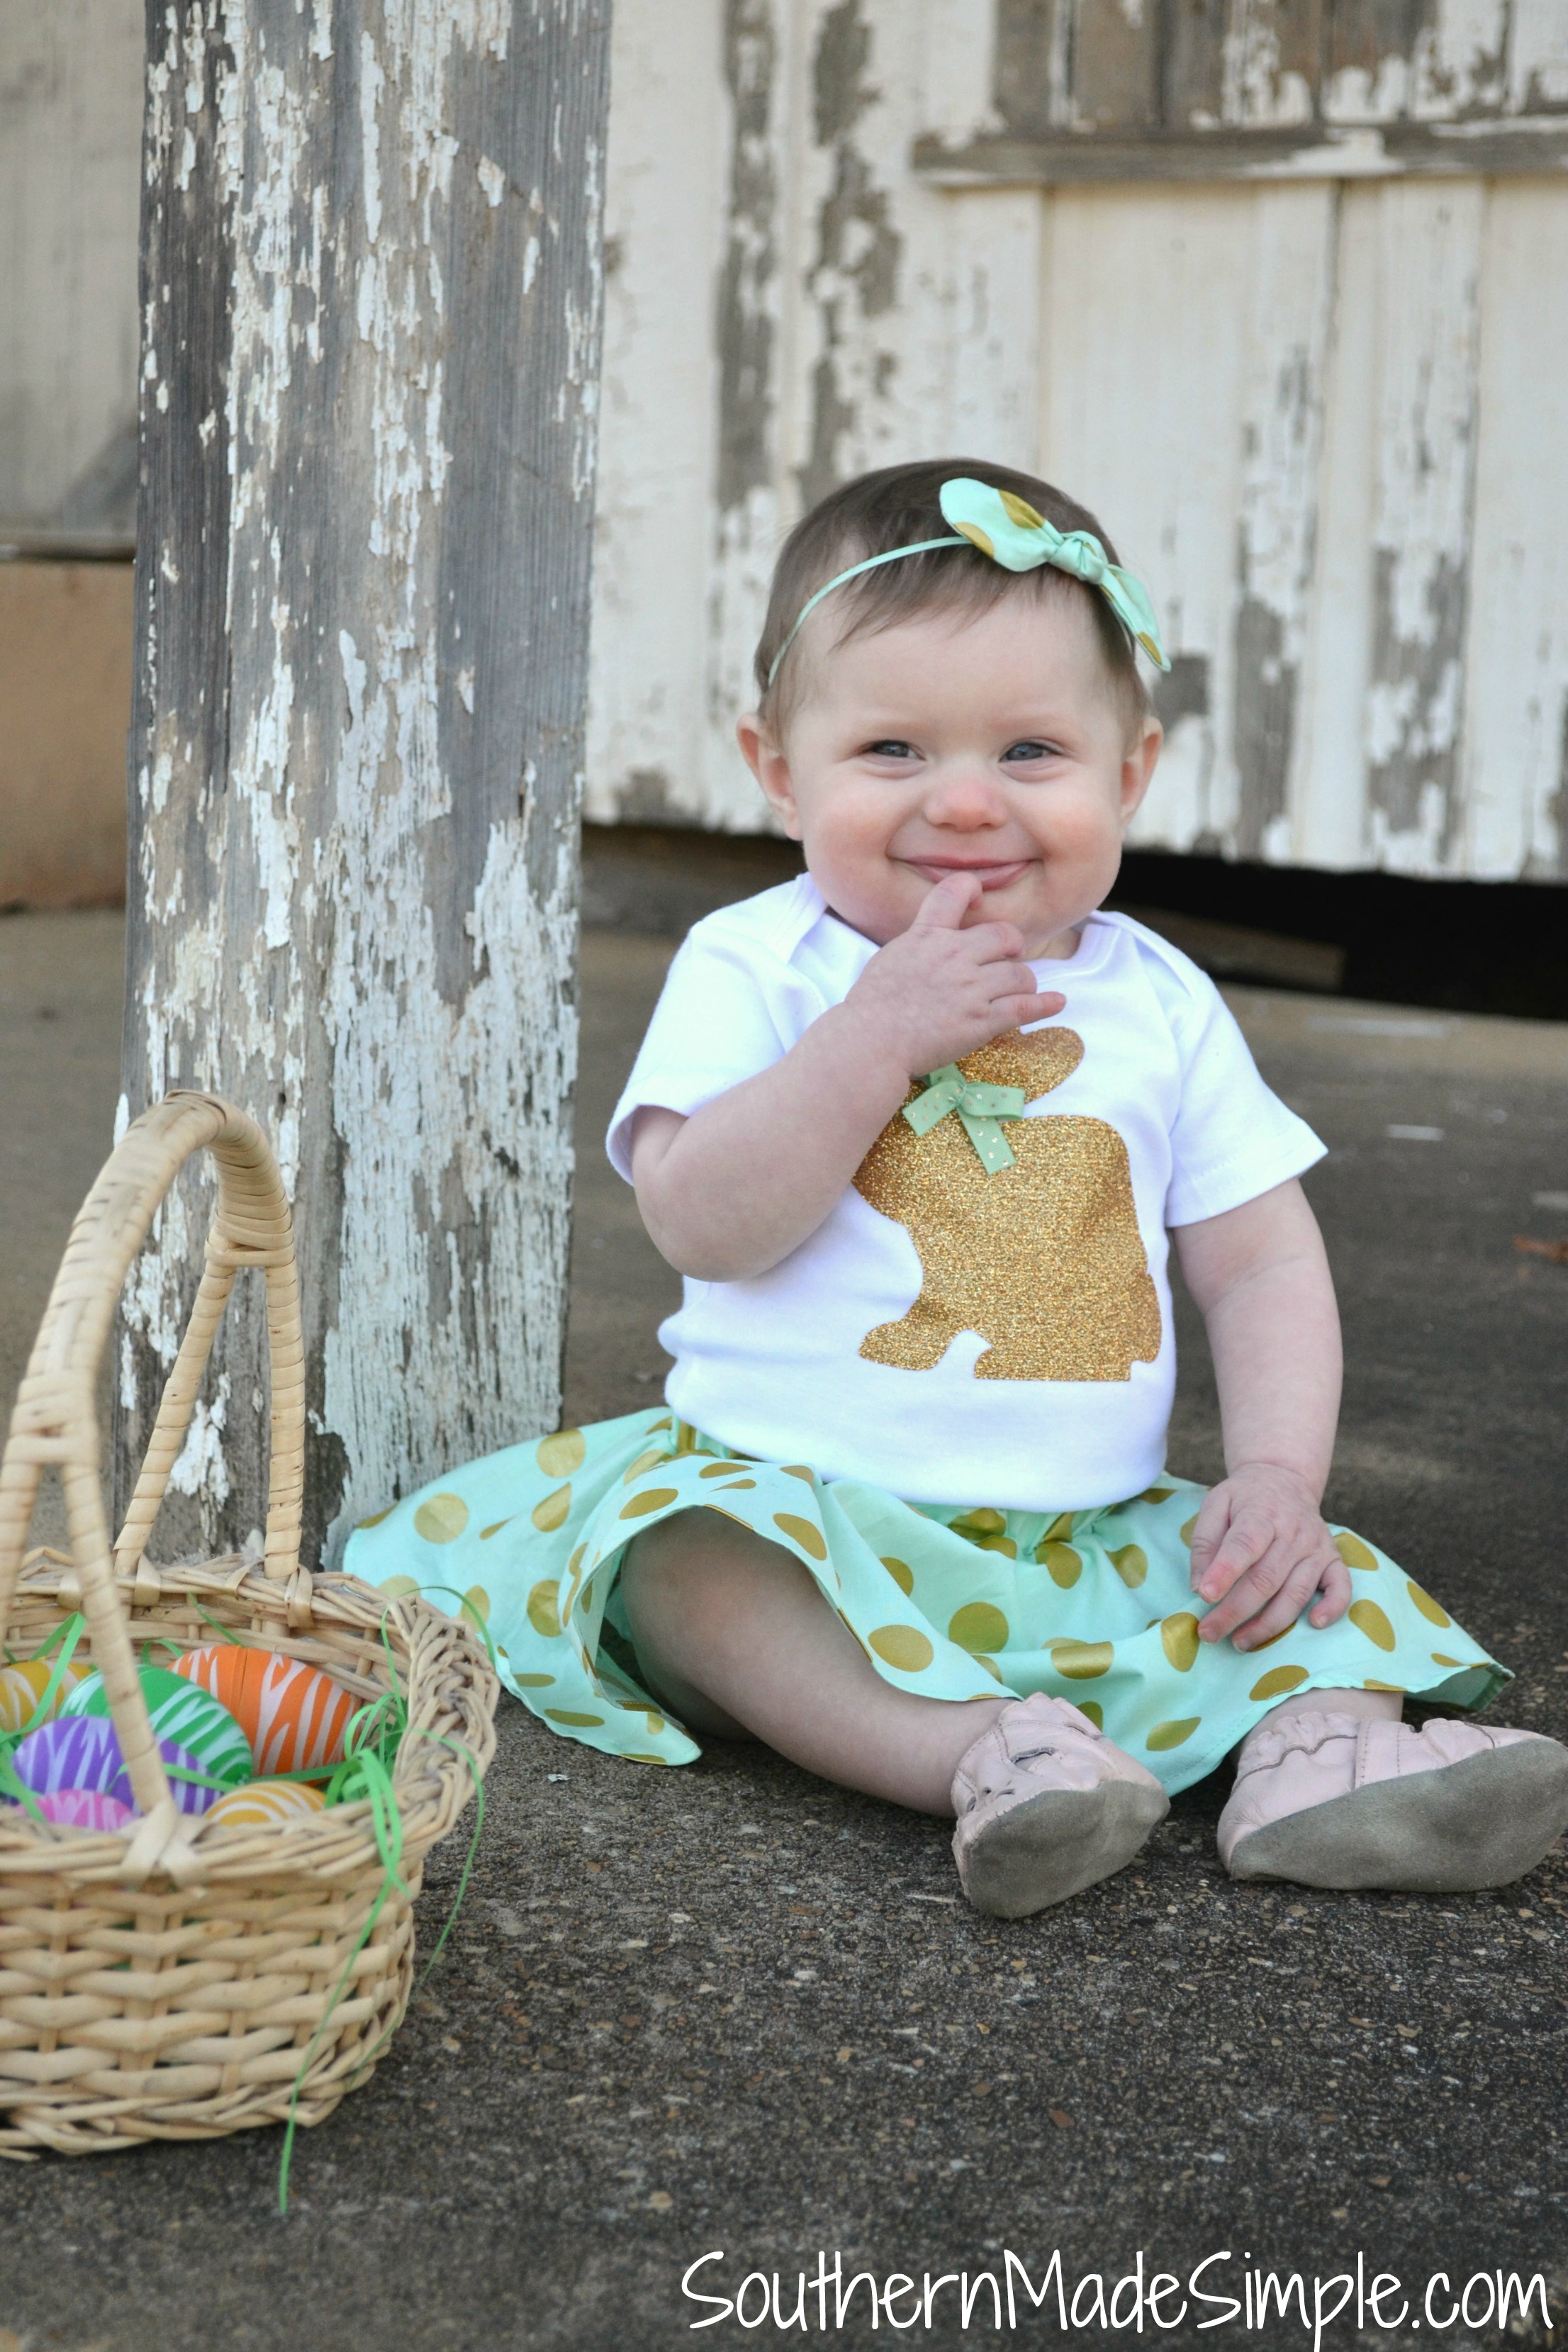 Olive Loves Apple Easter Bunny Outfit Giveaway Ends 3/1